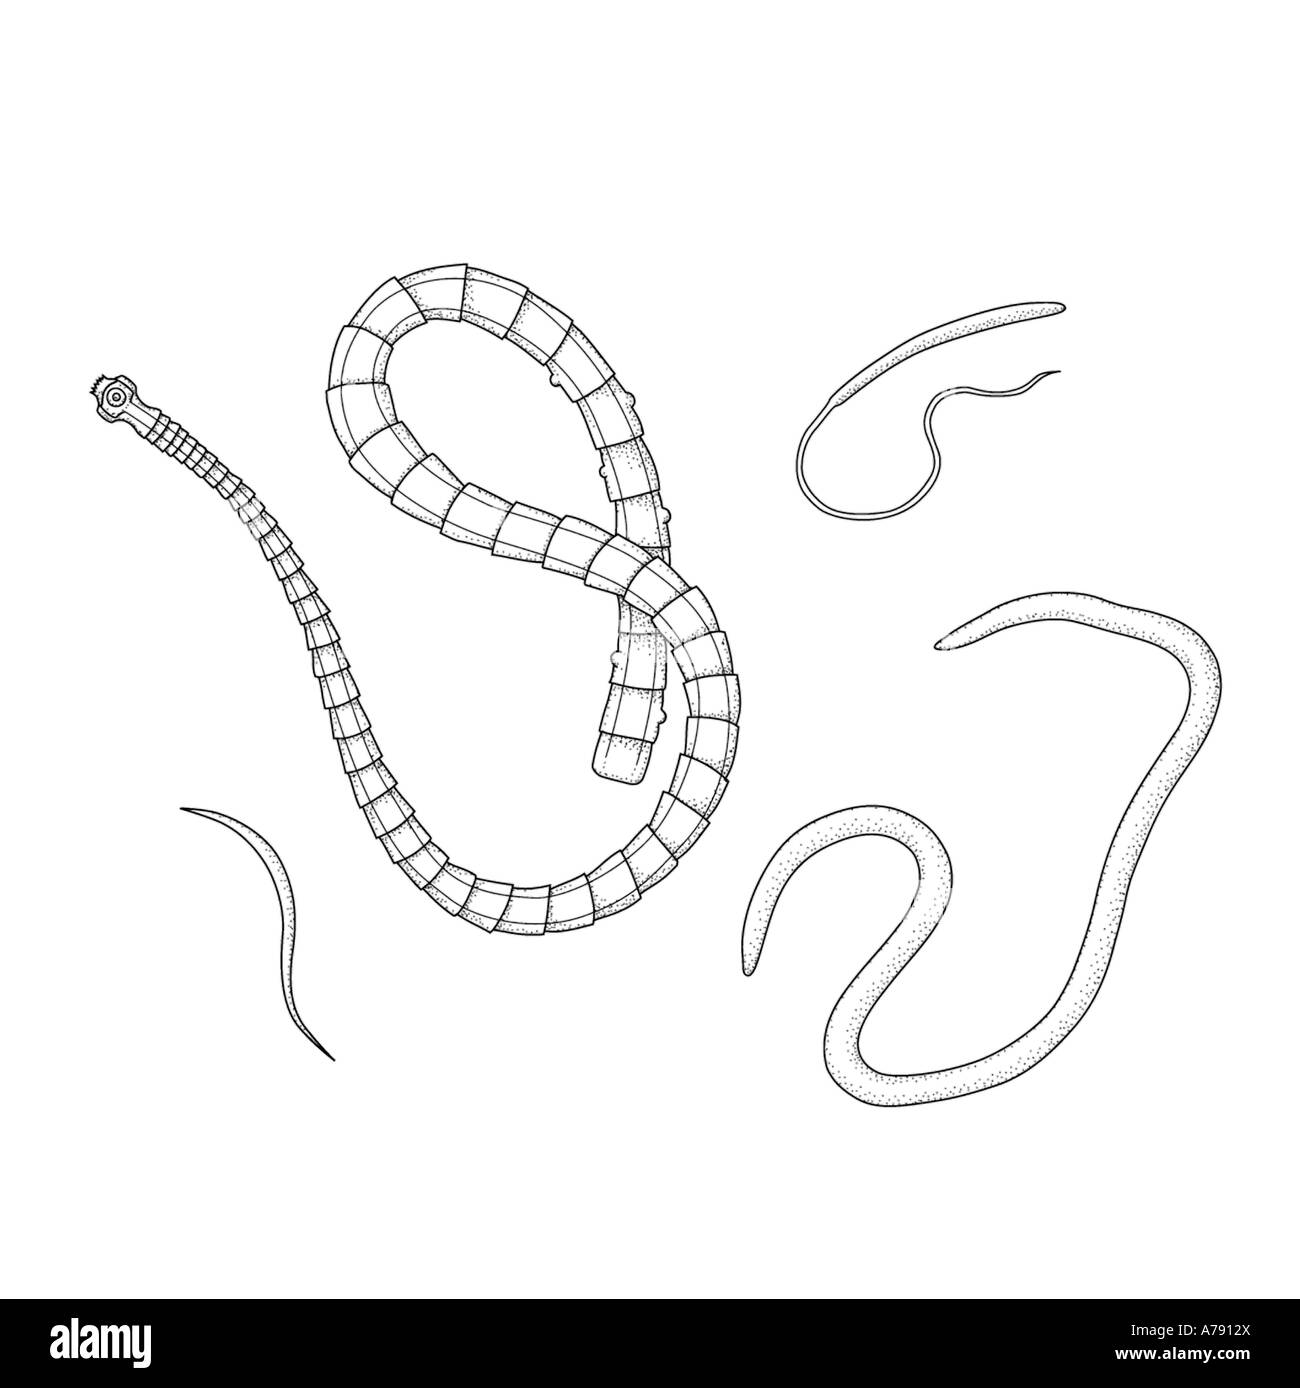 Earthworm Drawing Easy  Easy drawings, Elementary drawing